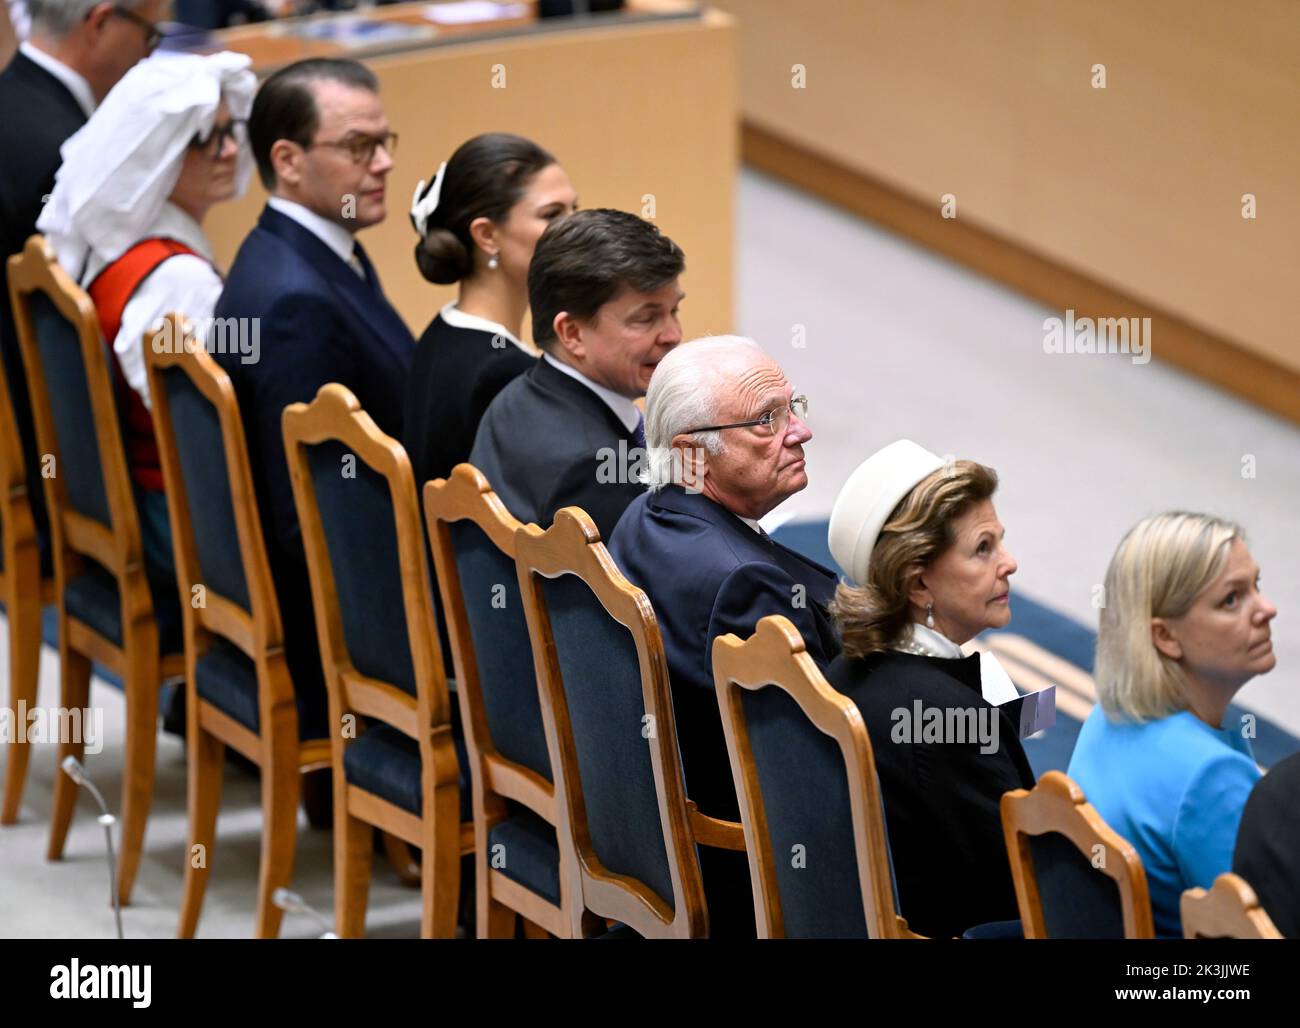 Prince Daniel, Crown Princess Victoria, The Speaker Andreas Norlén, King Carl XVI Gustaf, Queen Silvia and Prime Minister Magdalena Andersson during the opening of the Riksdag session in Stockholm, Sweden, September 27, 2022.Photo: Anders Wiklund / TT / code 10040 Stock Photo